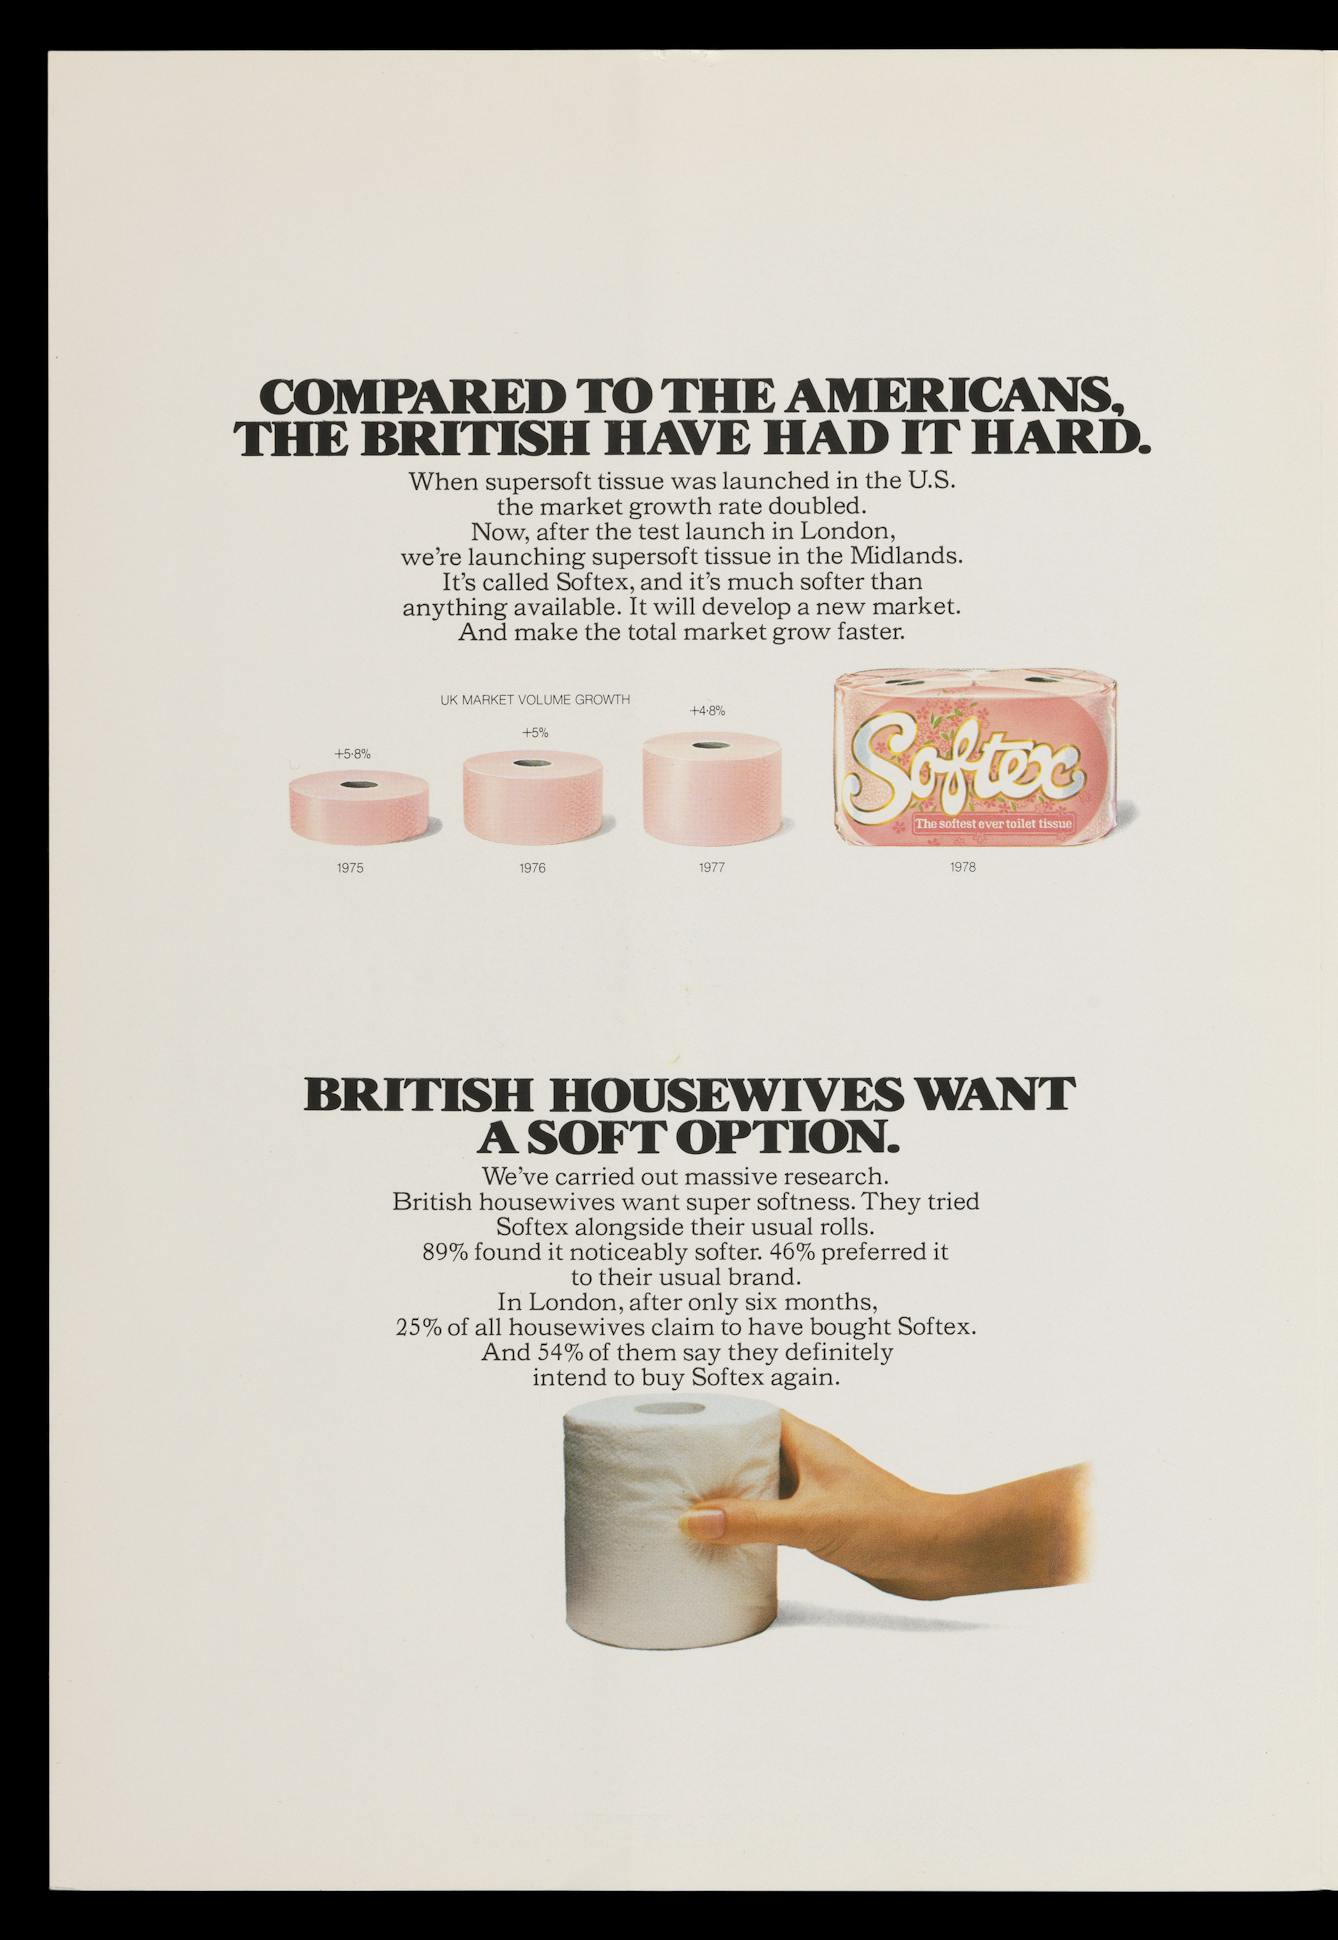 Photograph of the inside page of a promotional leaflet for Andrex toilet tissue pushing the virtues of soft toilet tissue, with the title, "Compared to the Americans the British have had it hard".